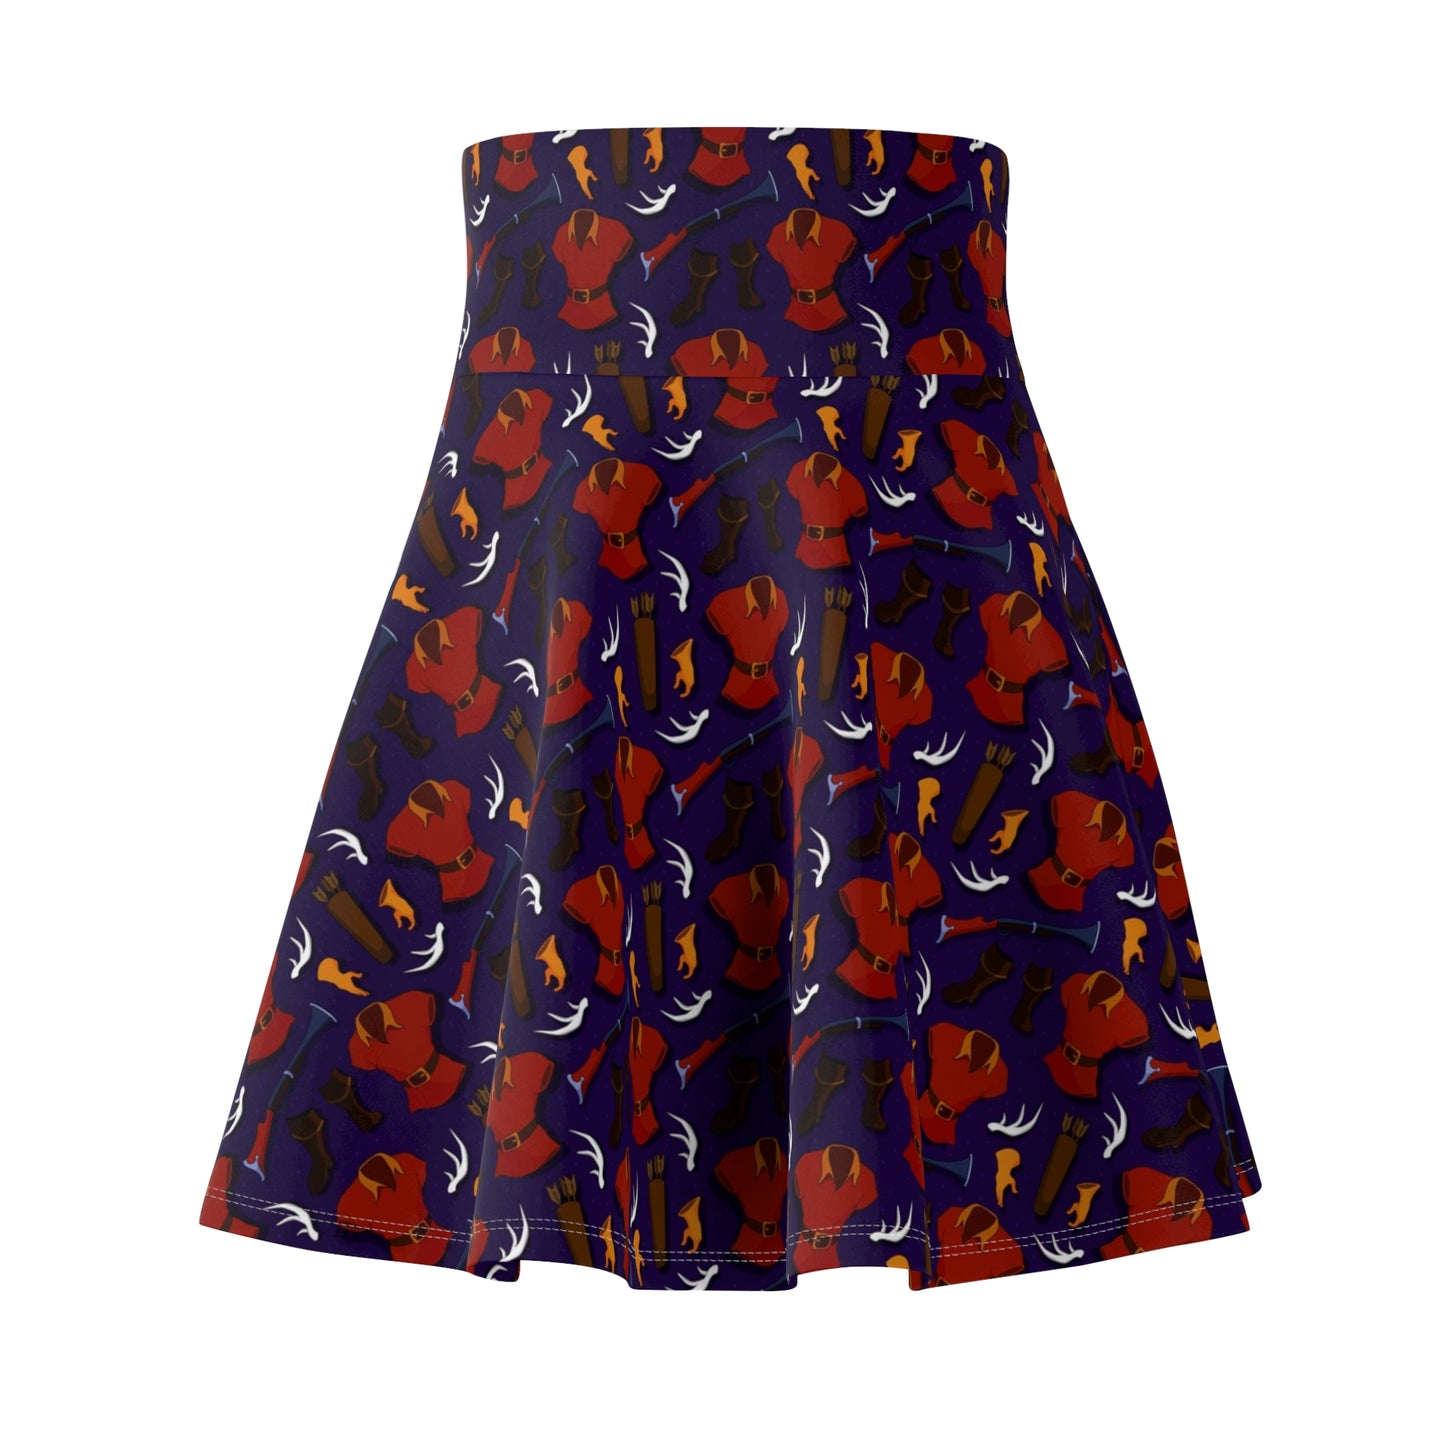 No Man In Town Half As Manly Women's Skater Skirt